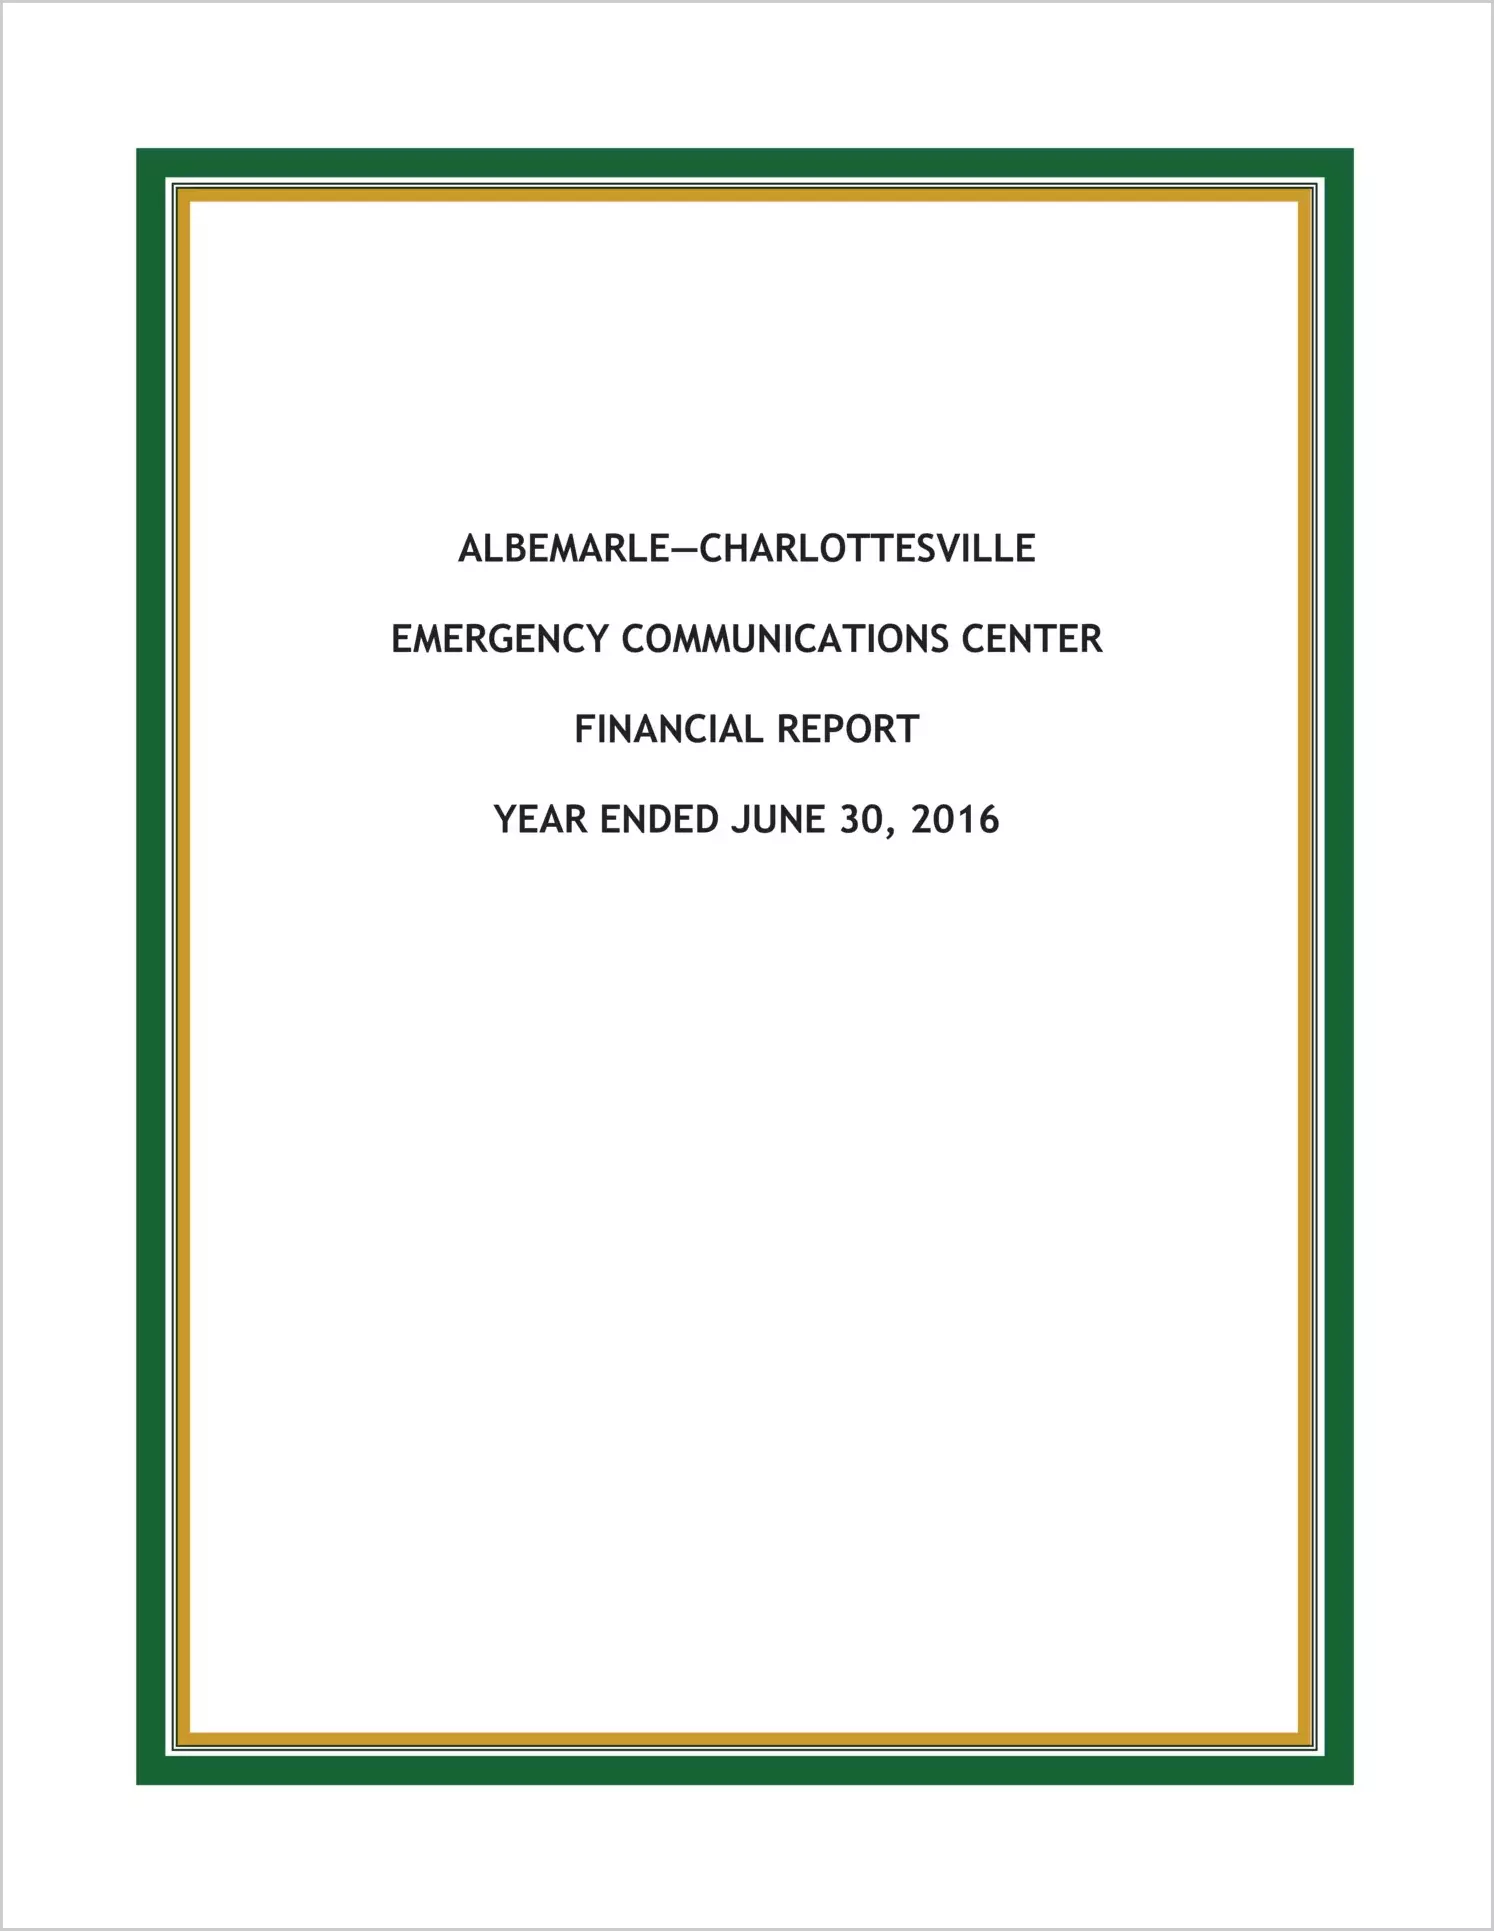 2016 ABC/Other Annual Financial Report  for Albemarle-Charlottesville Emergency Communications Center